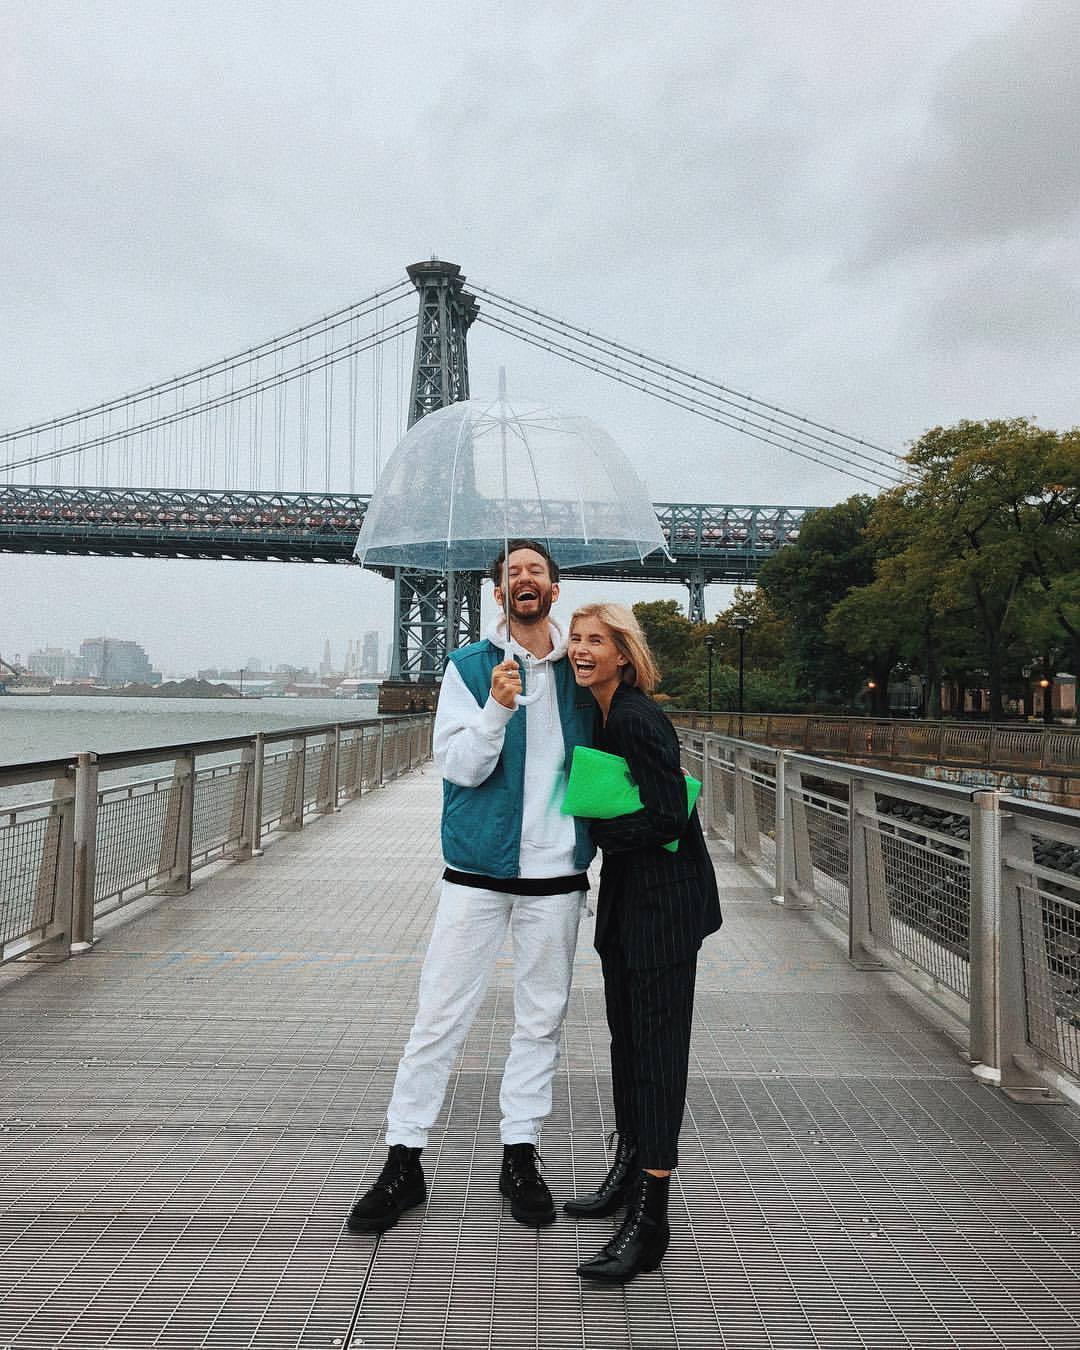 After @boss with a boss (@xeniaoverdose) 📷 by a boss (@jyrgn) (at East River NYC)
https://www.instagram.com/p/BnhlRrDBRXp/?utm_source=ig_tumblr_share&igshid=1thsg0me81vxb